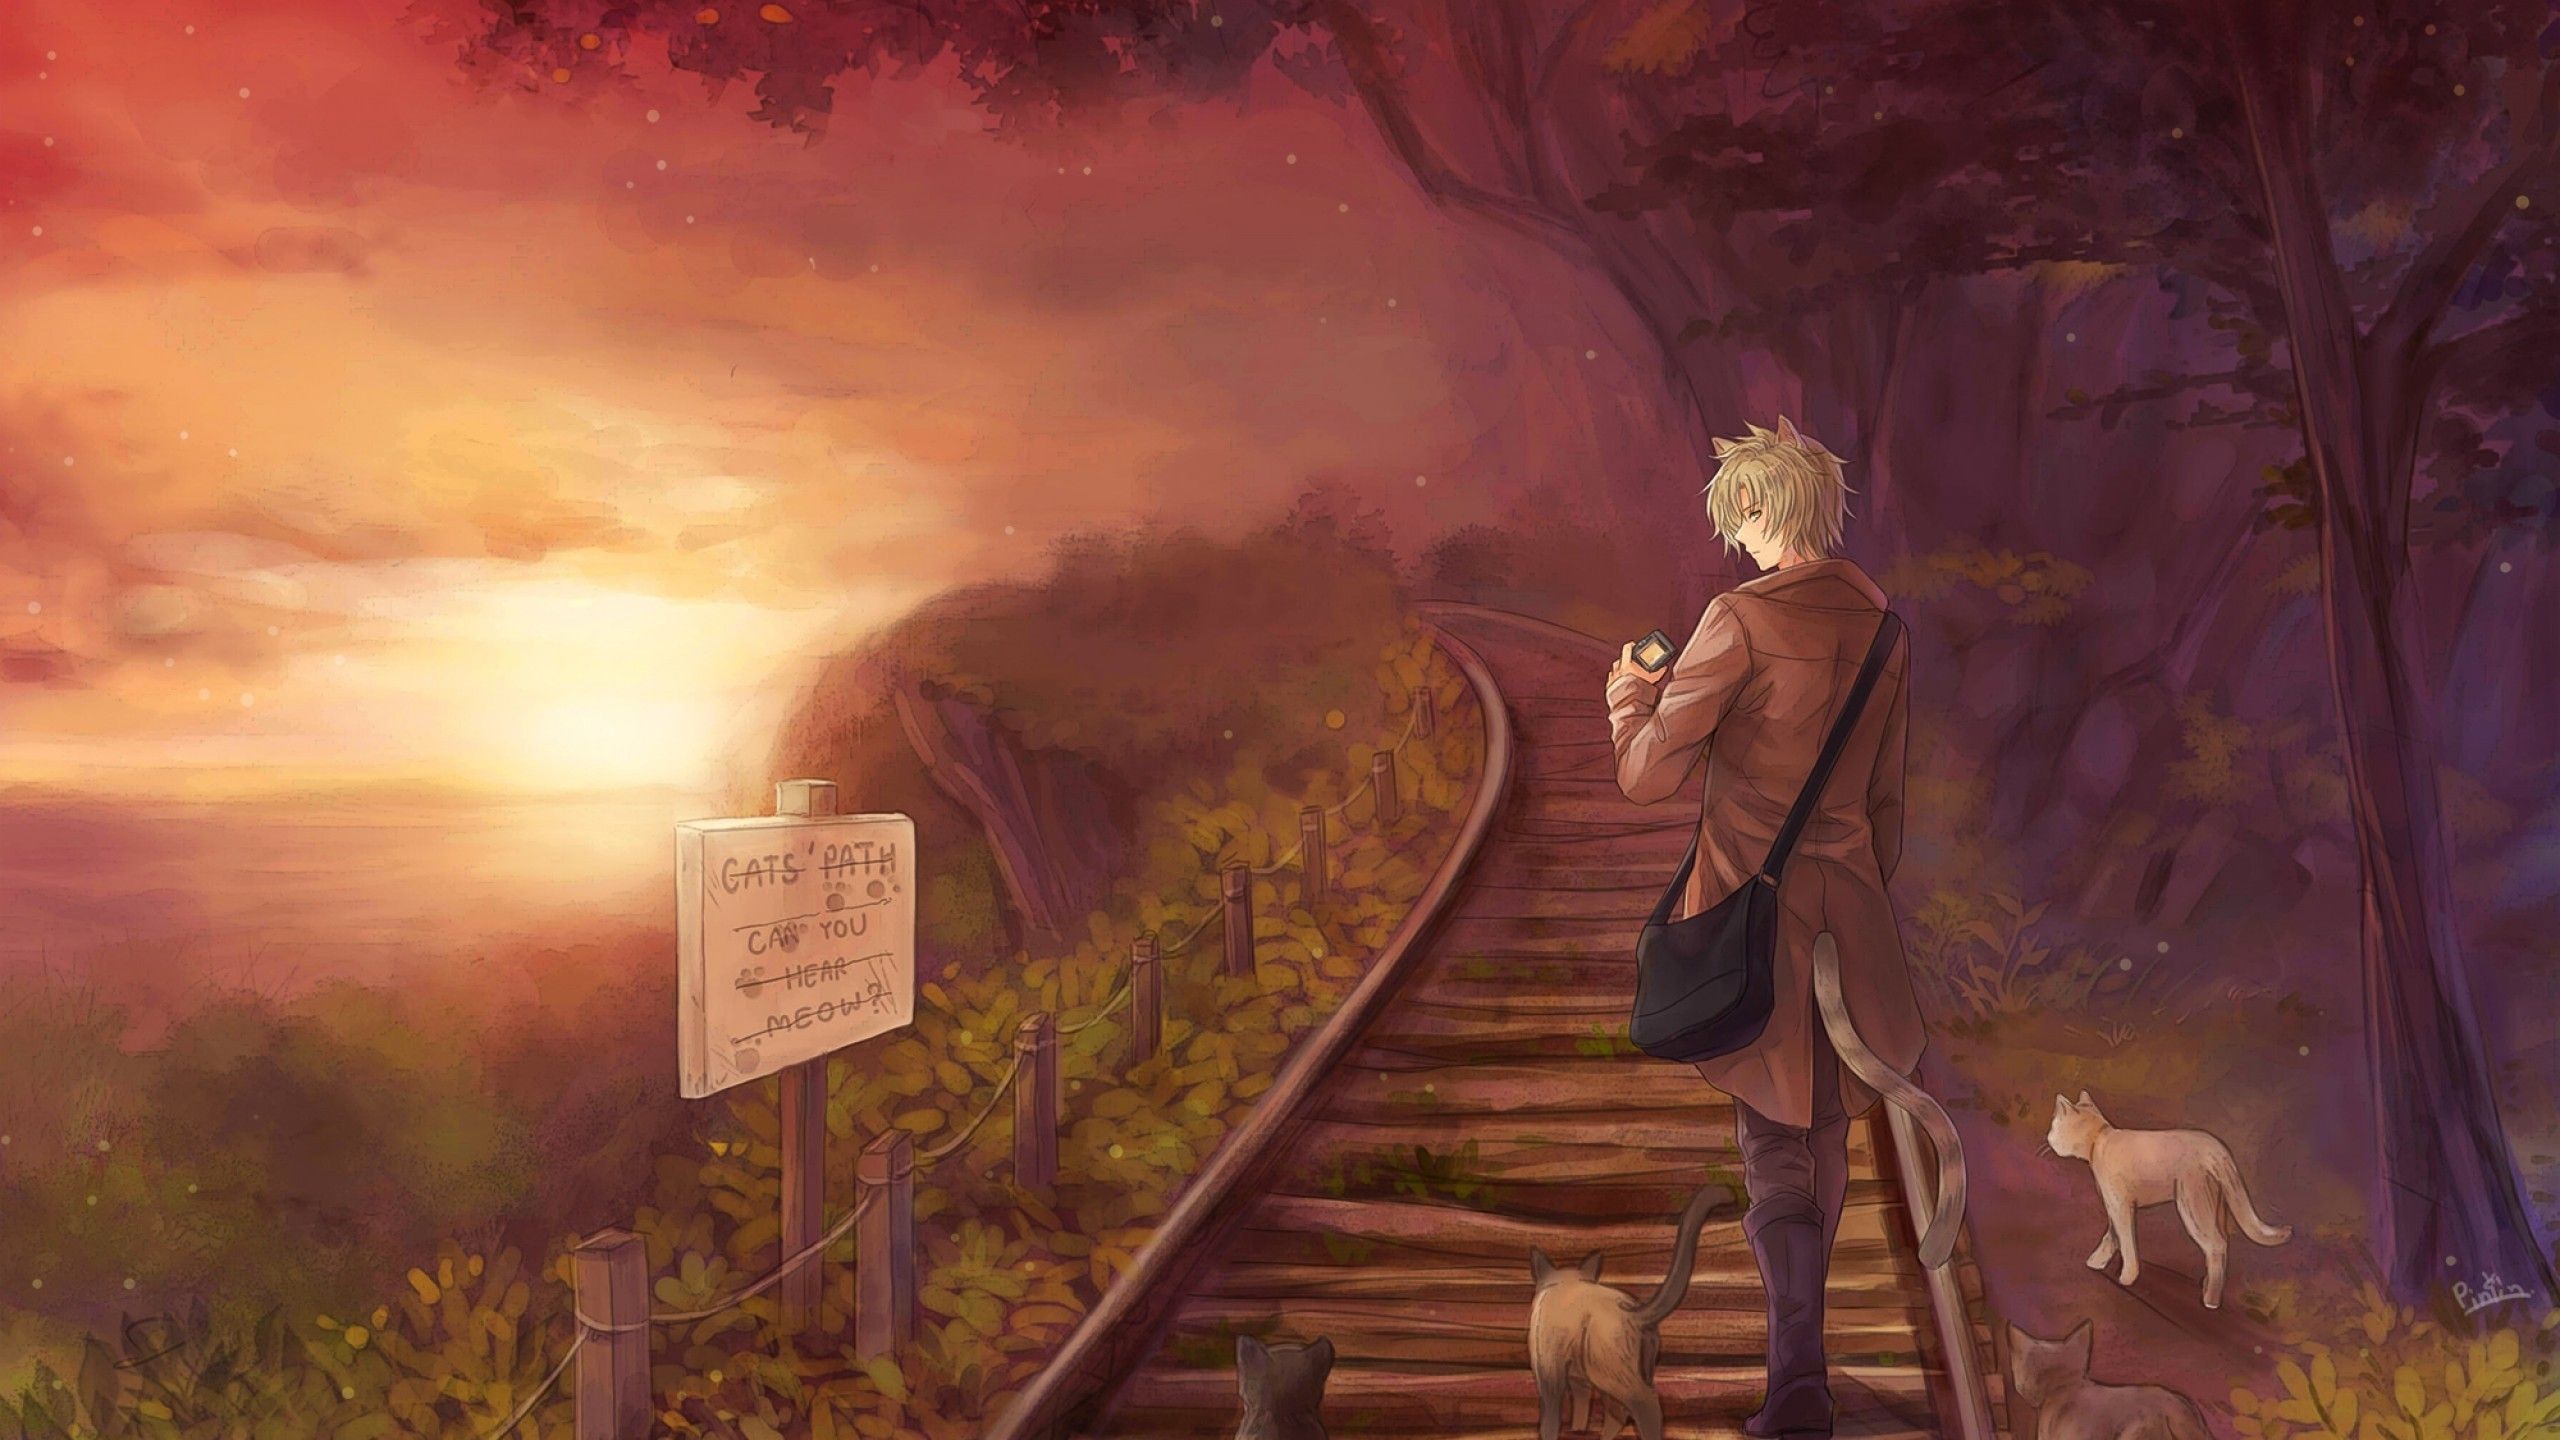 Download 2560x1440 Anime Boy, Cats, Sunset, Scenic, Animal Ears, Cat Boy Wallpaper for iMac 27 inch